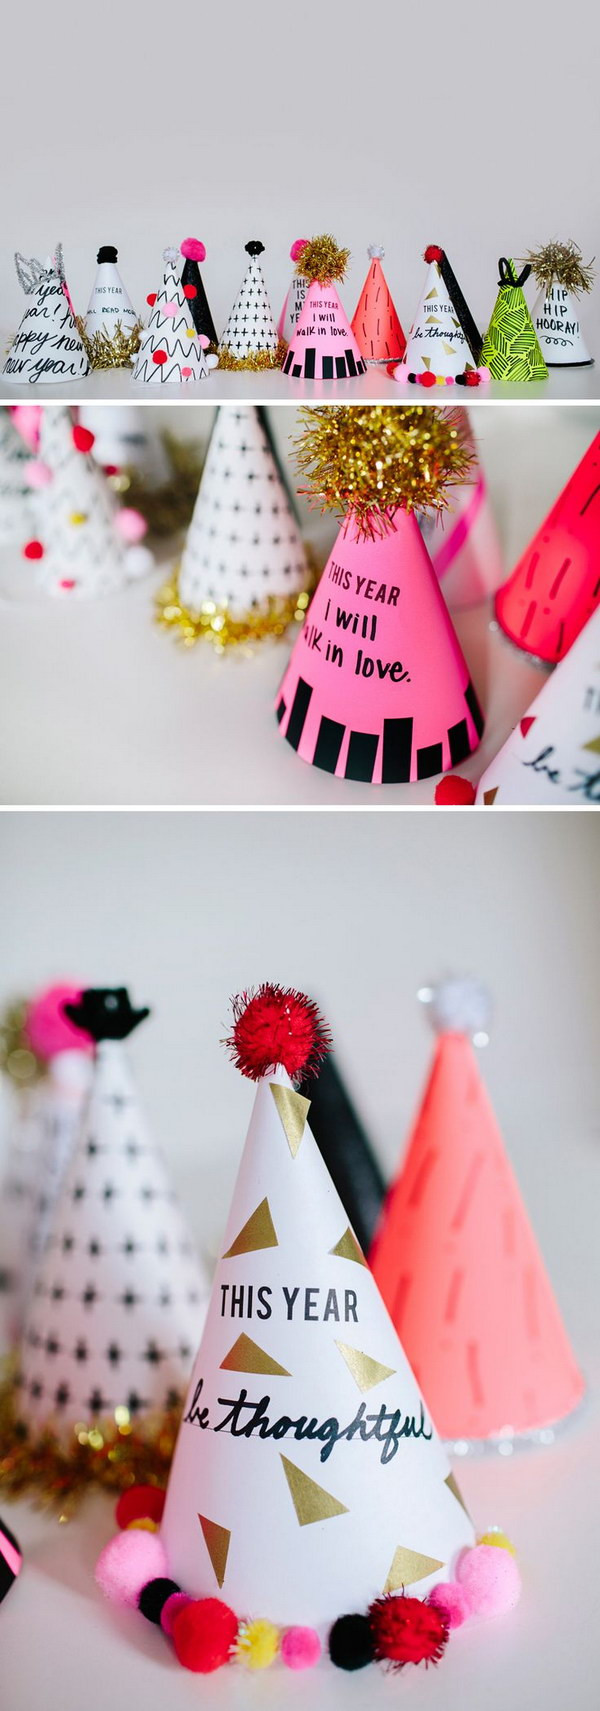 Diy Birthday Party
 Awesome New Year Party Ideas with Lots of DIY Tutorials